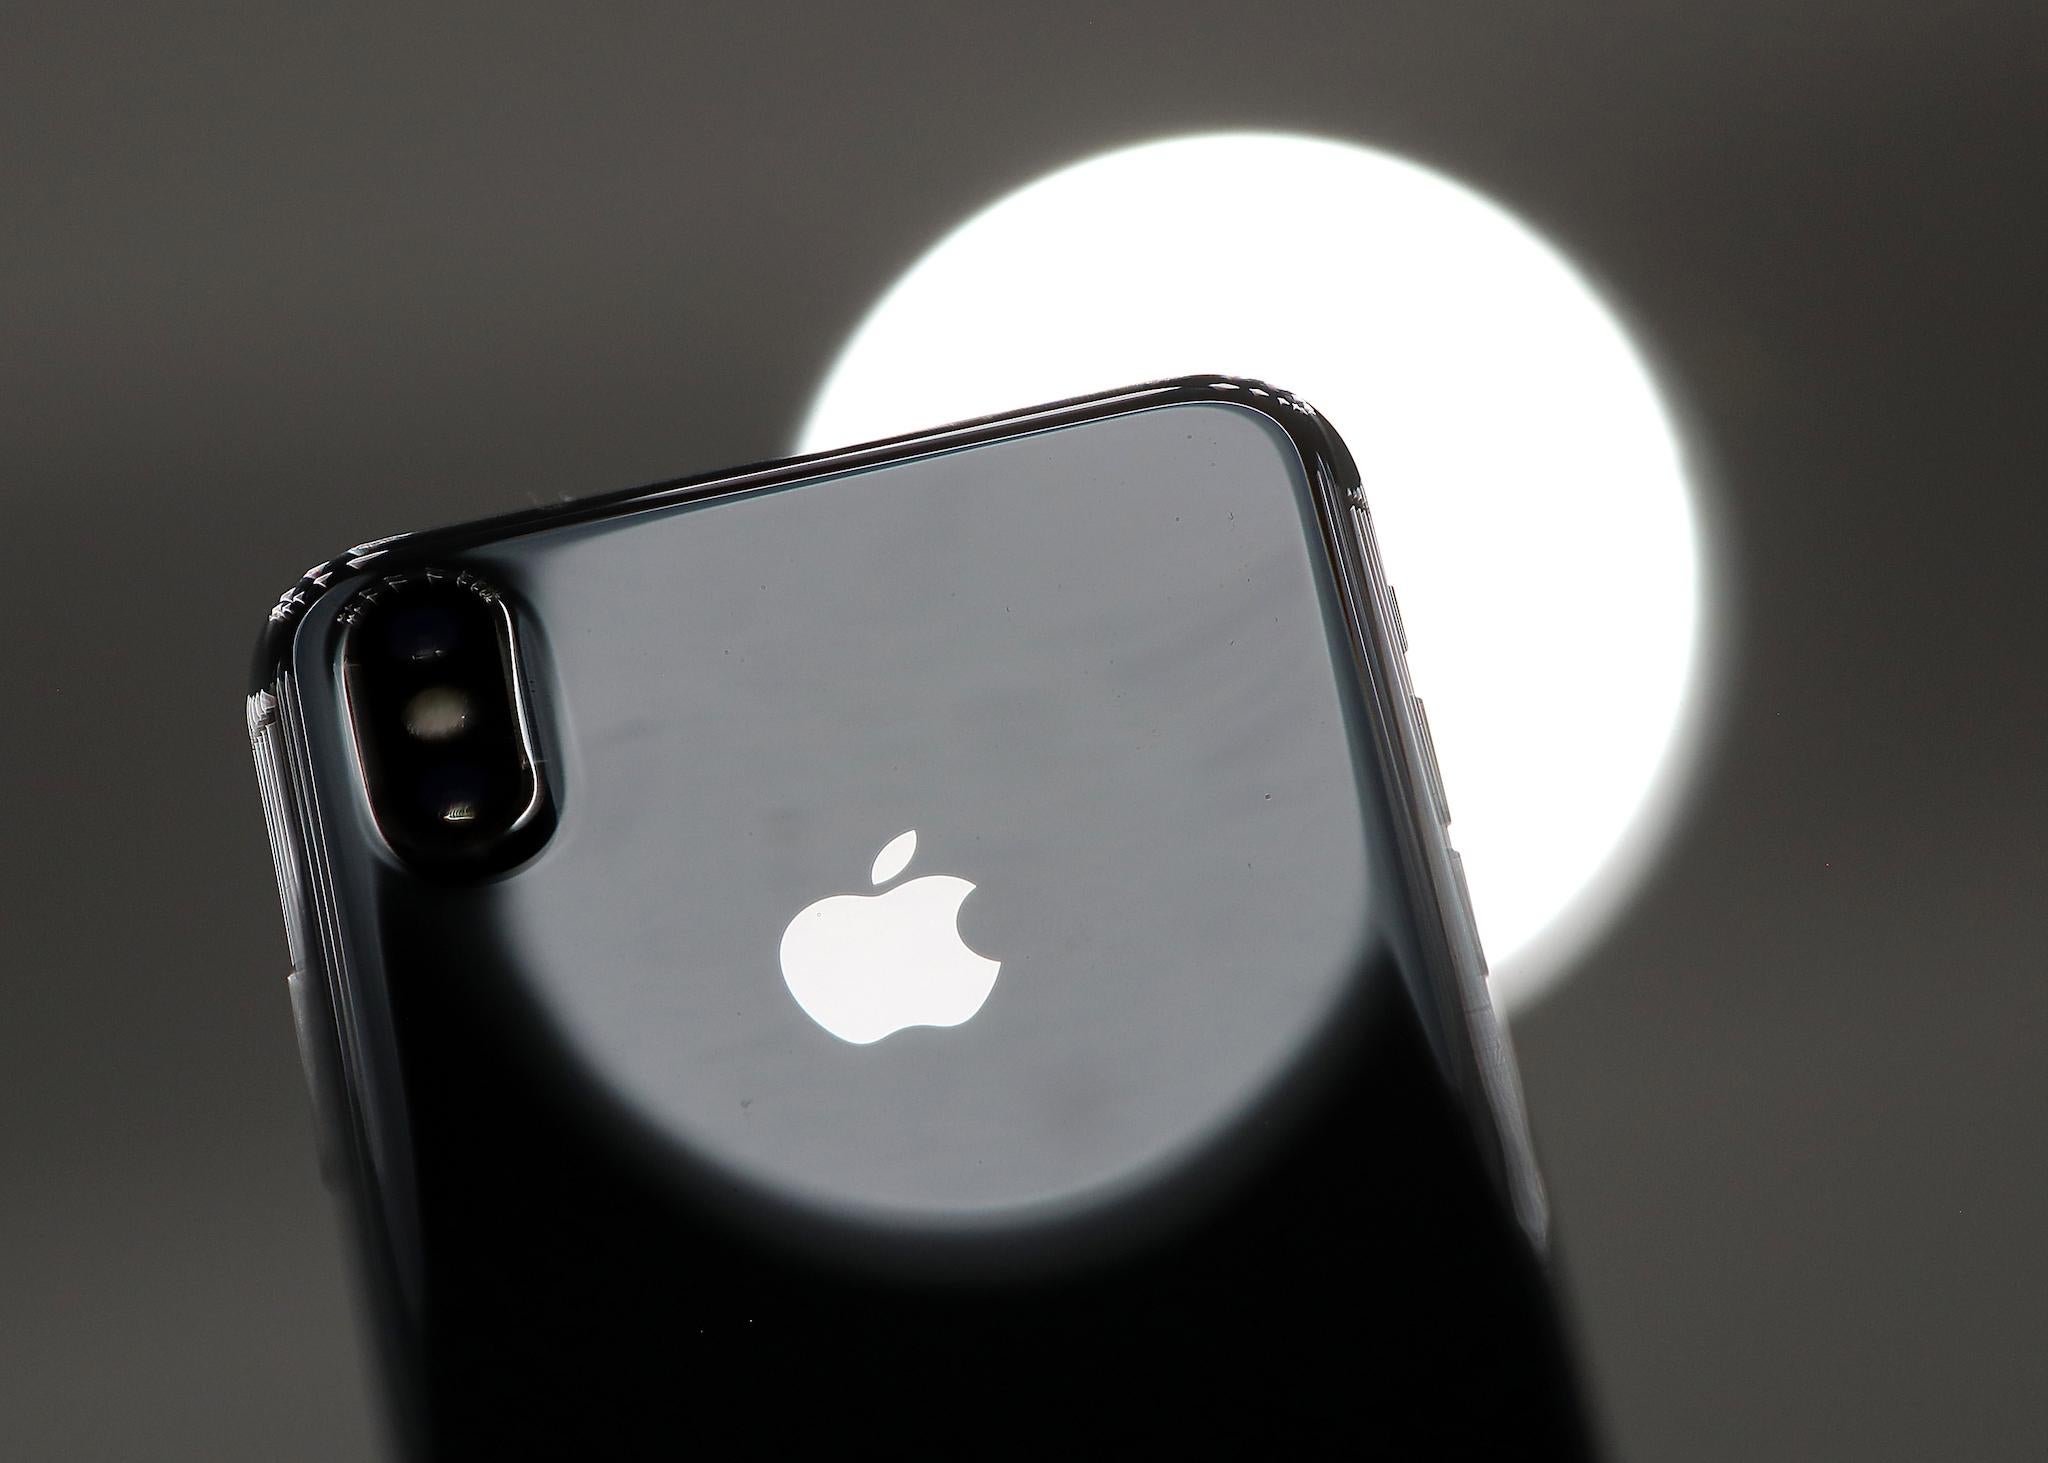 The iPhone X, which was revealed in minute detail before Apple got the chance to announce it